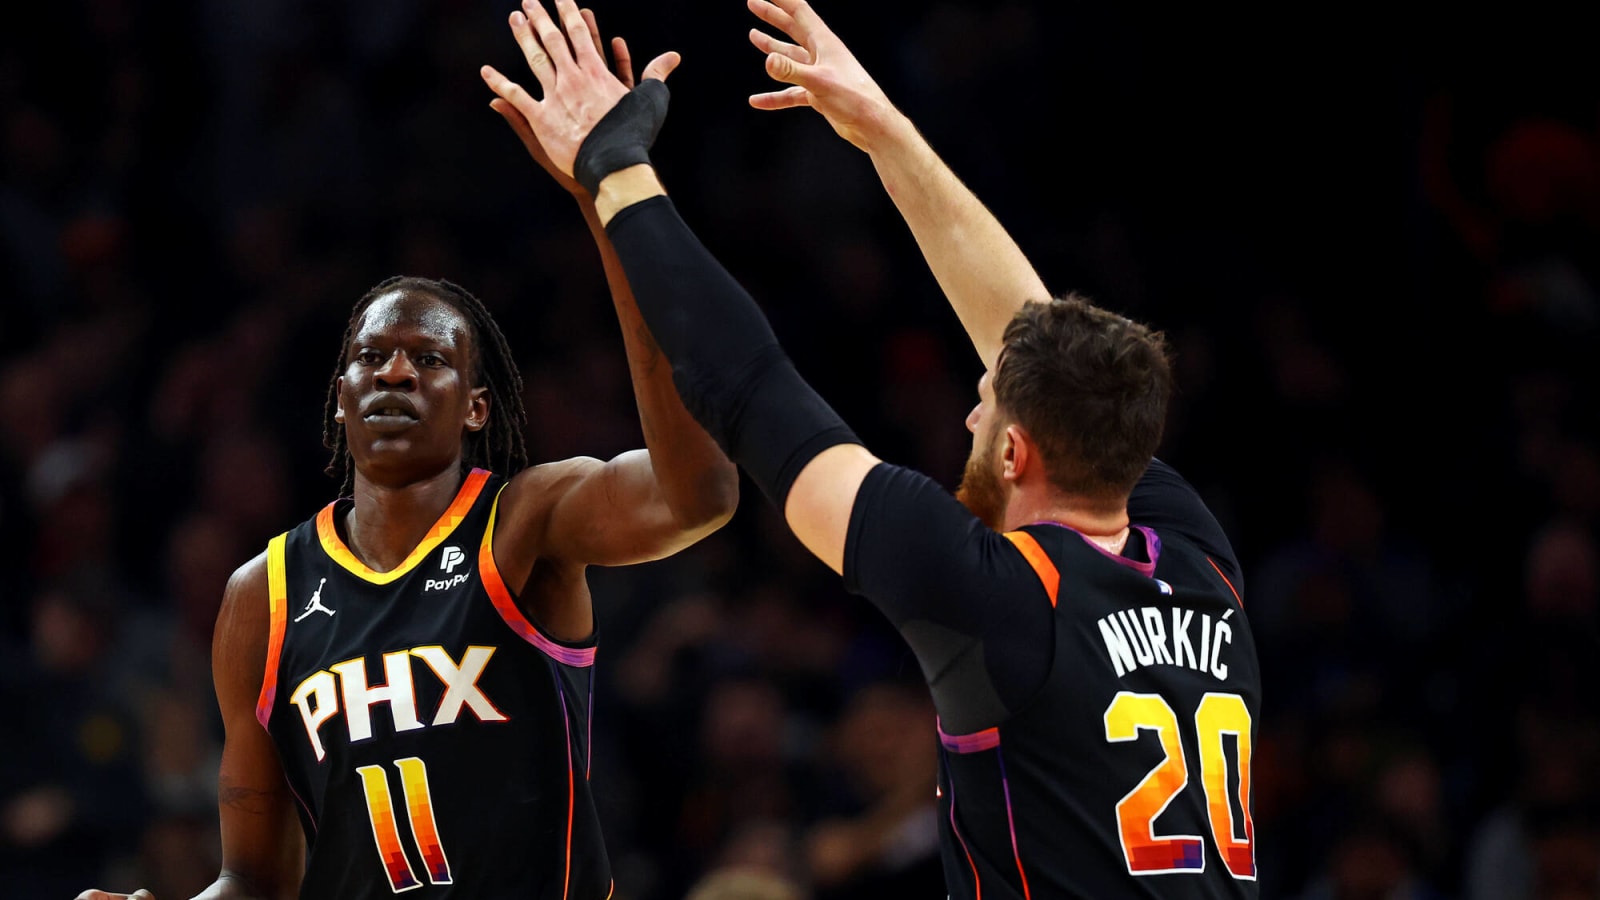 Bol Bol Shines in Unexpected Breakout Game in Suns’ Loss to Rockets